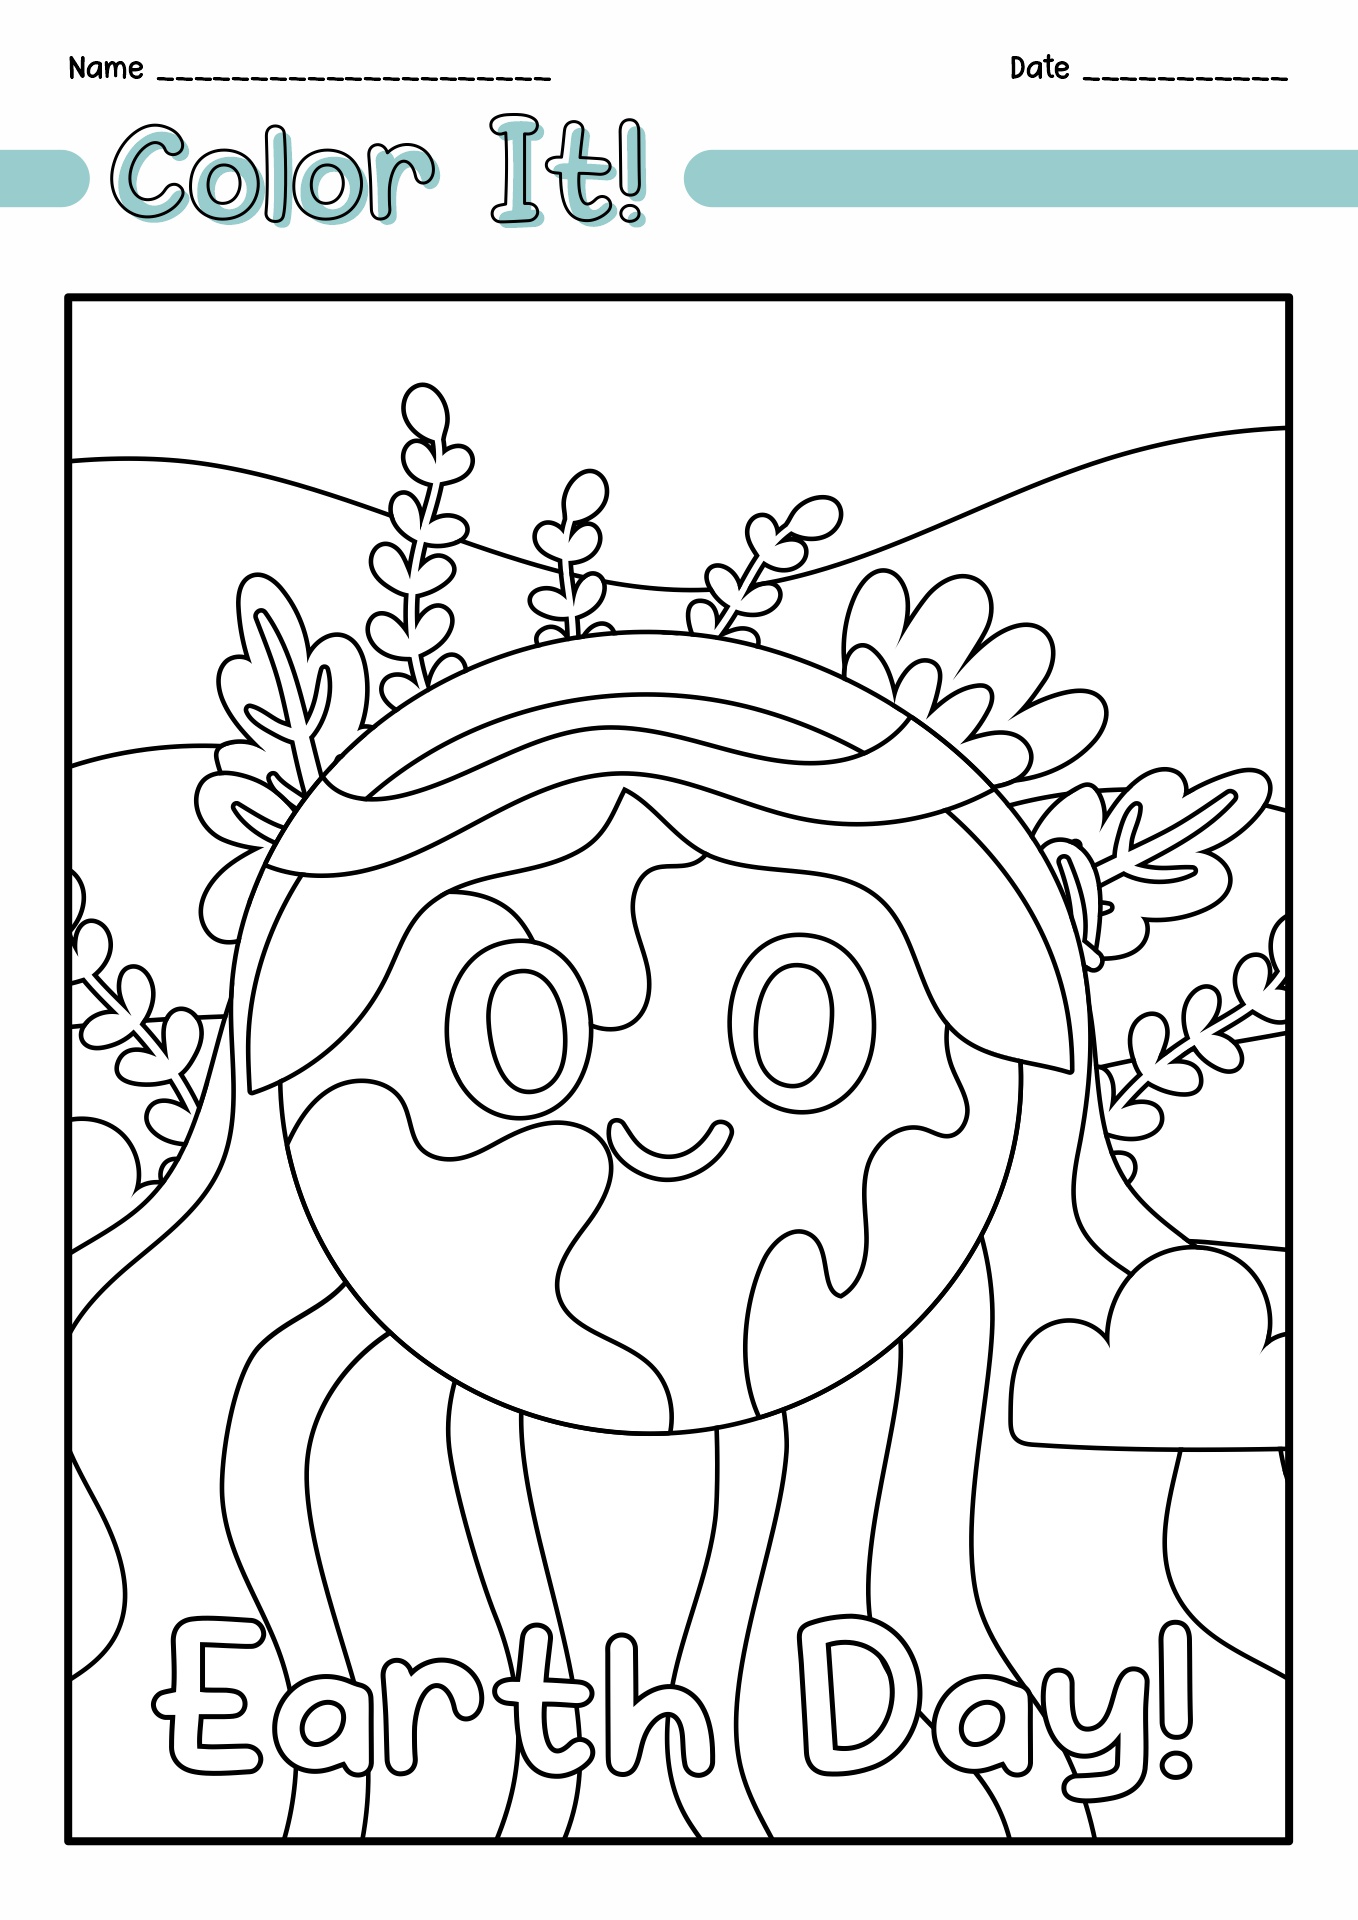 Earth Day Colouring Pages Image